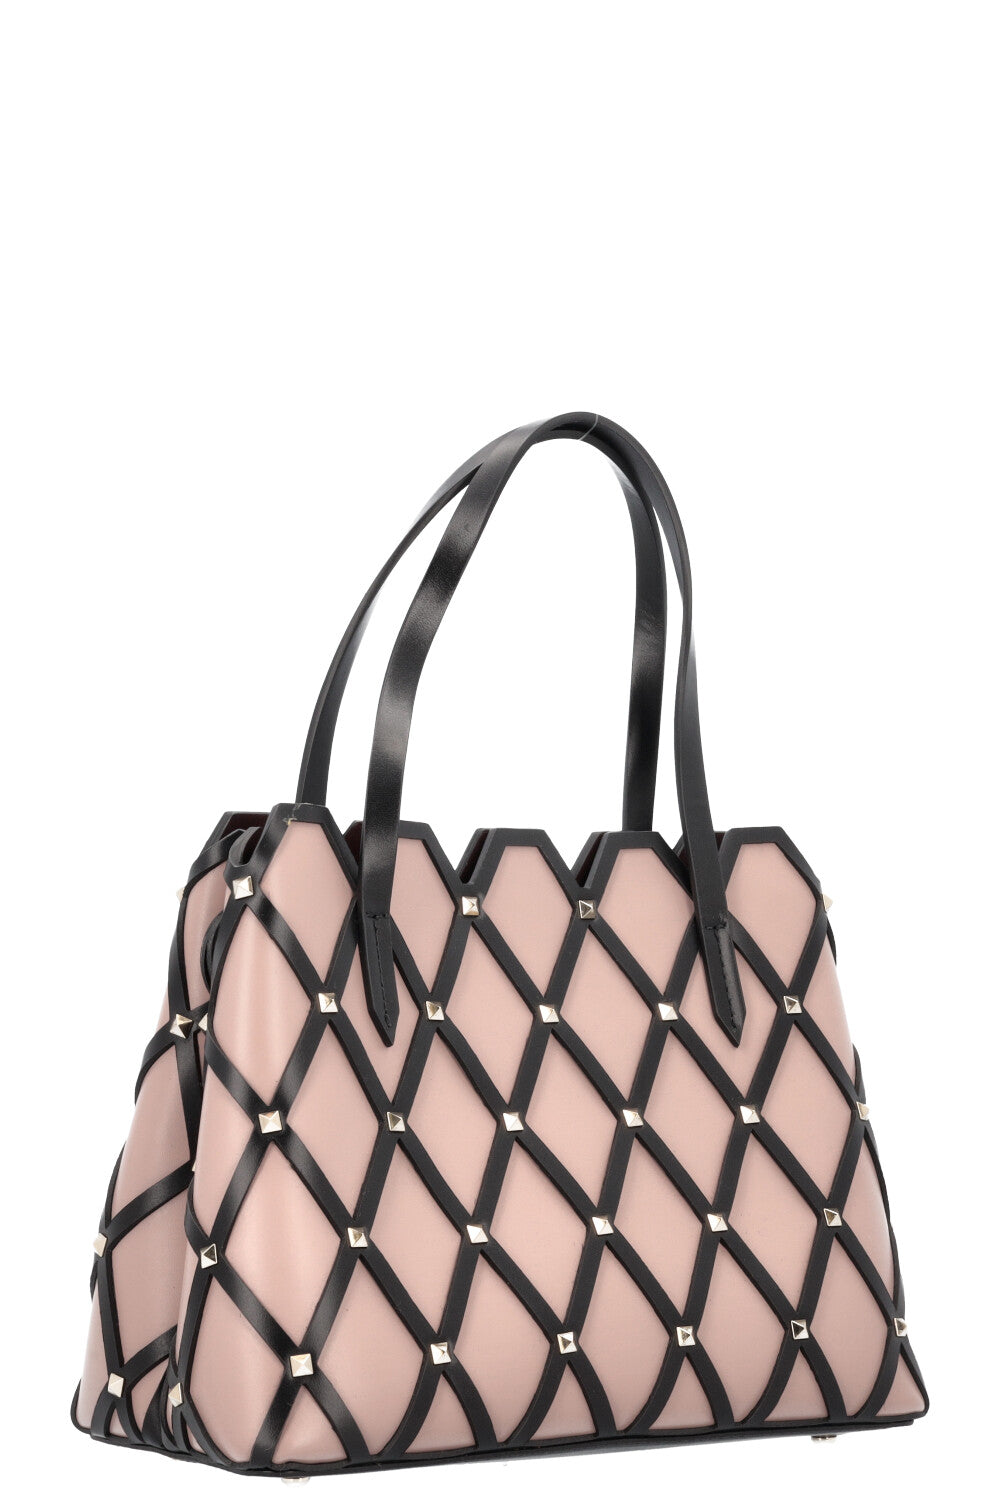 VALENTINO Beehive Tote Bag Small Black Dusty Rose